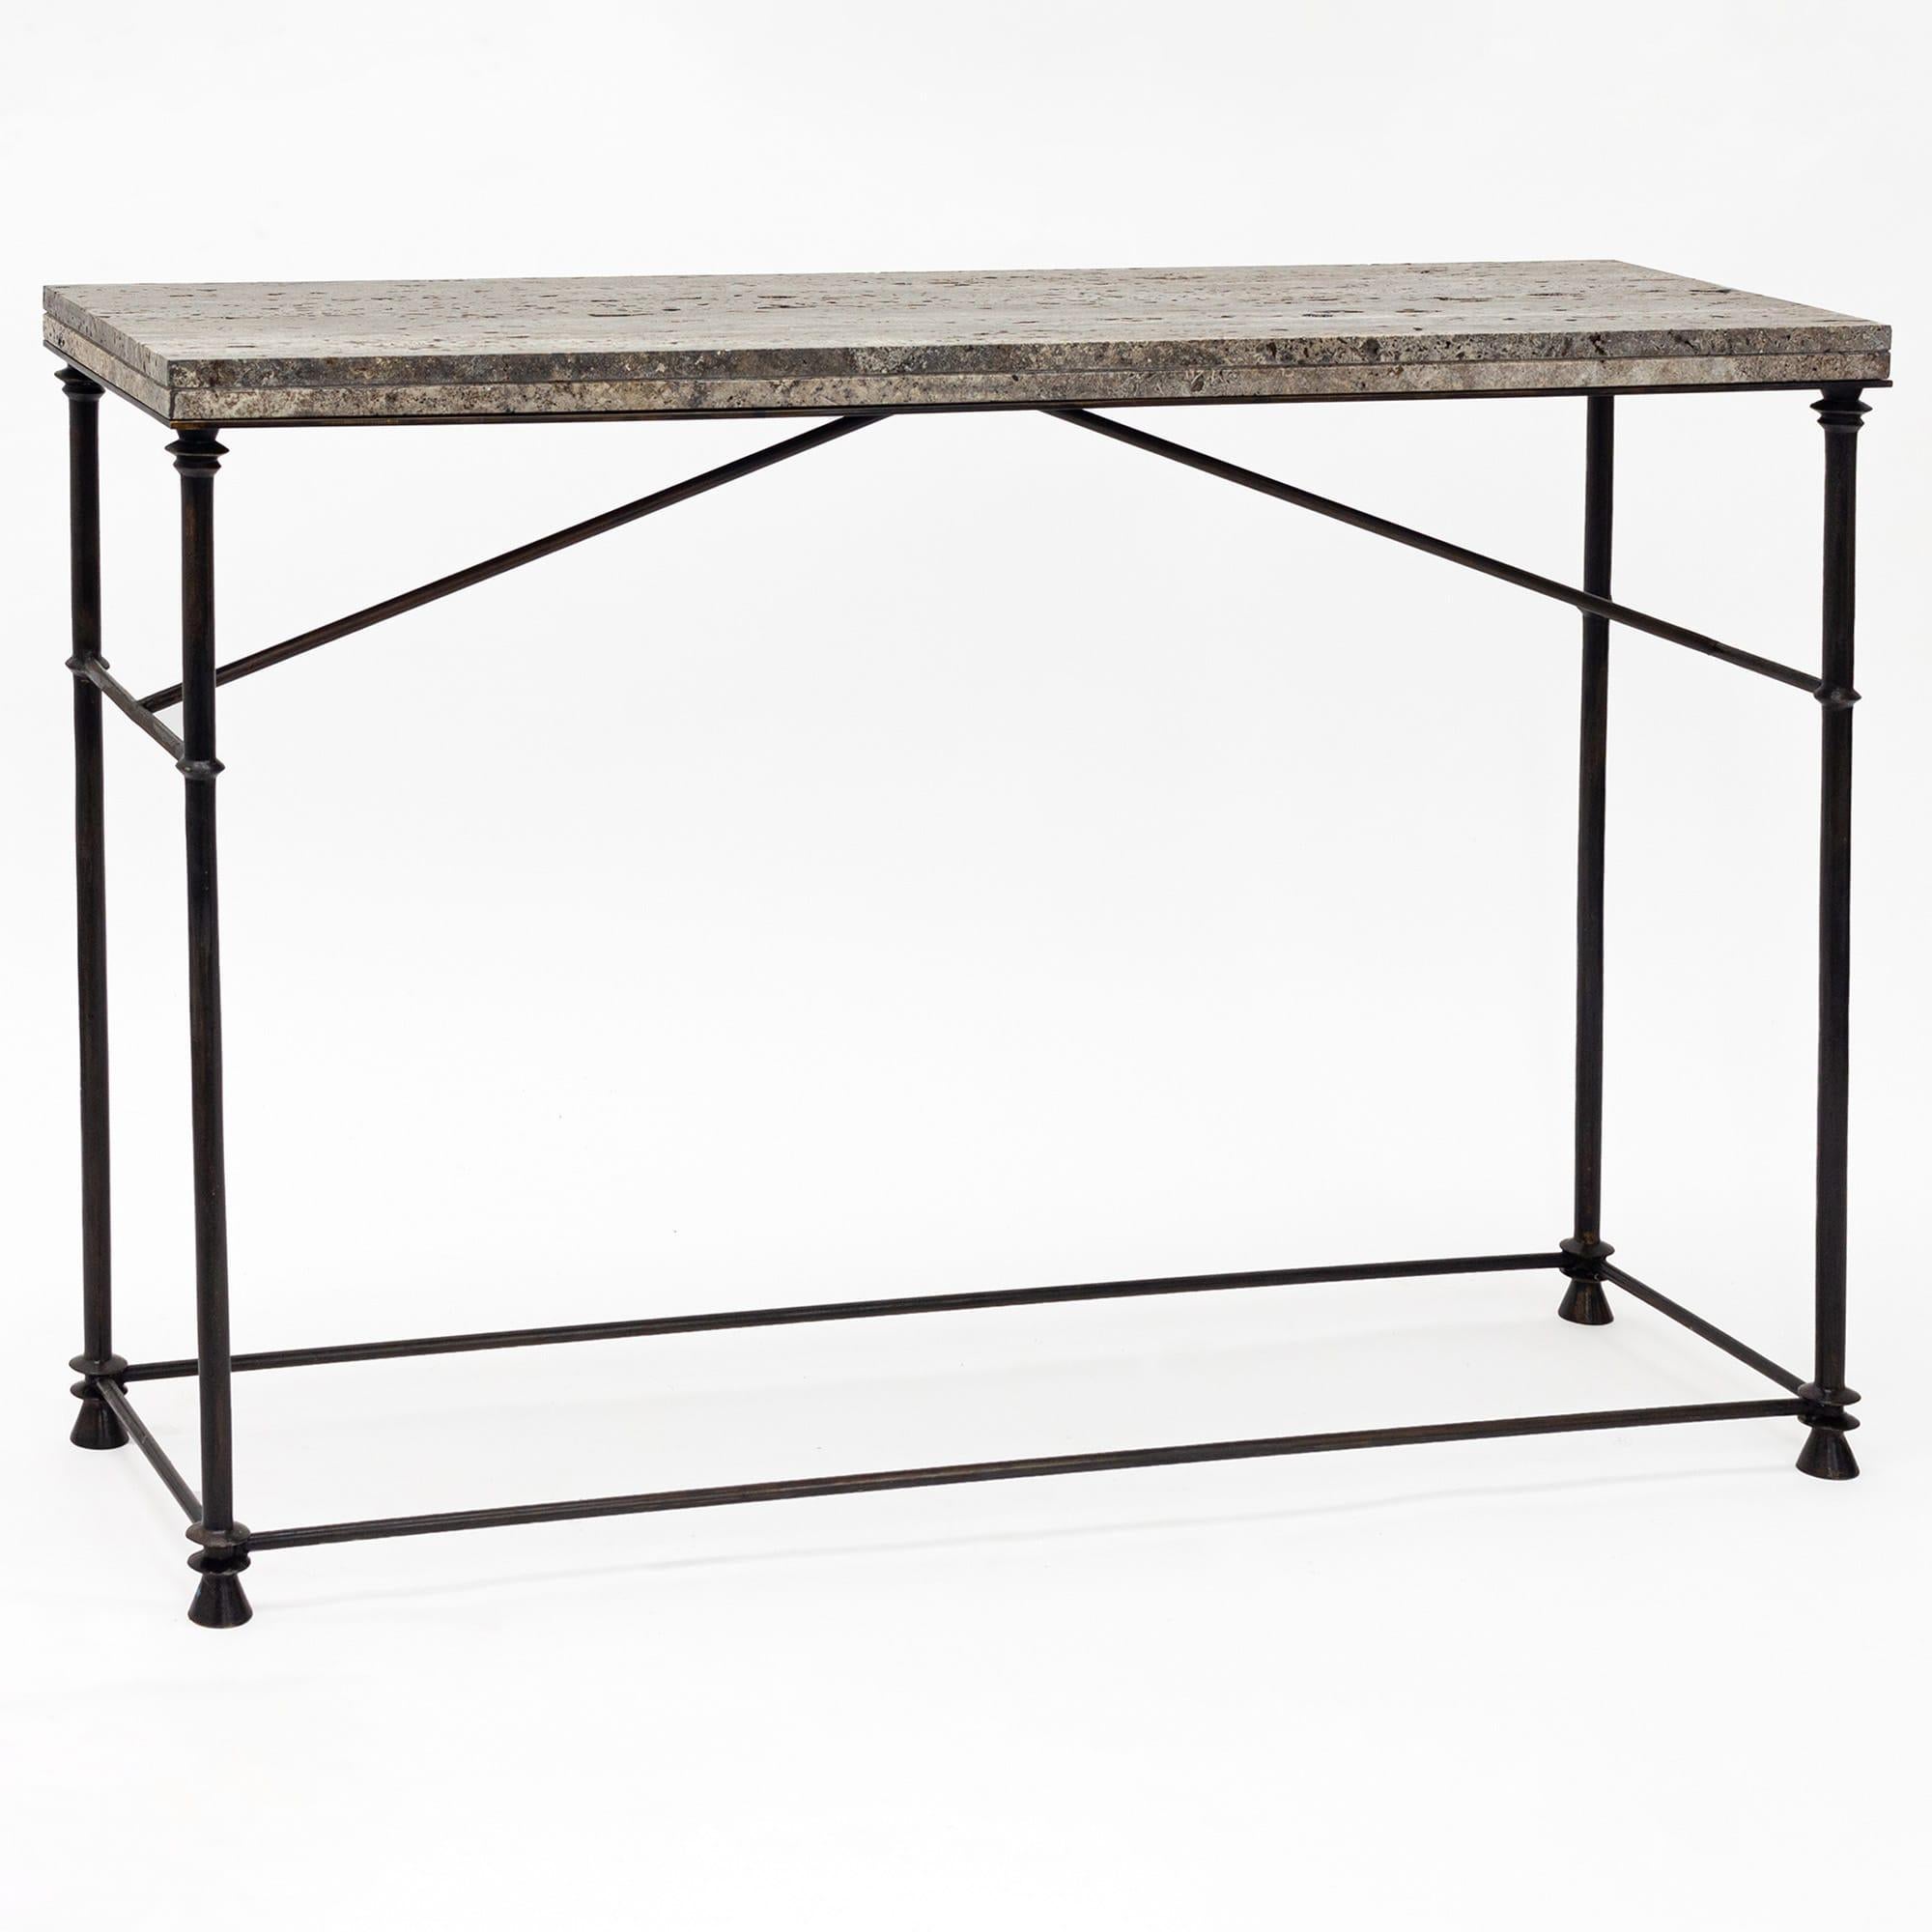 French Neoclassical Style Bronze and Travertine Console Table, Contemporary For Sale